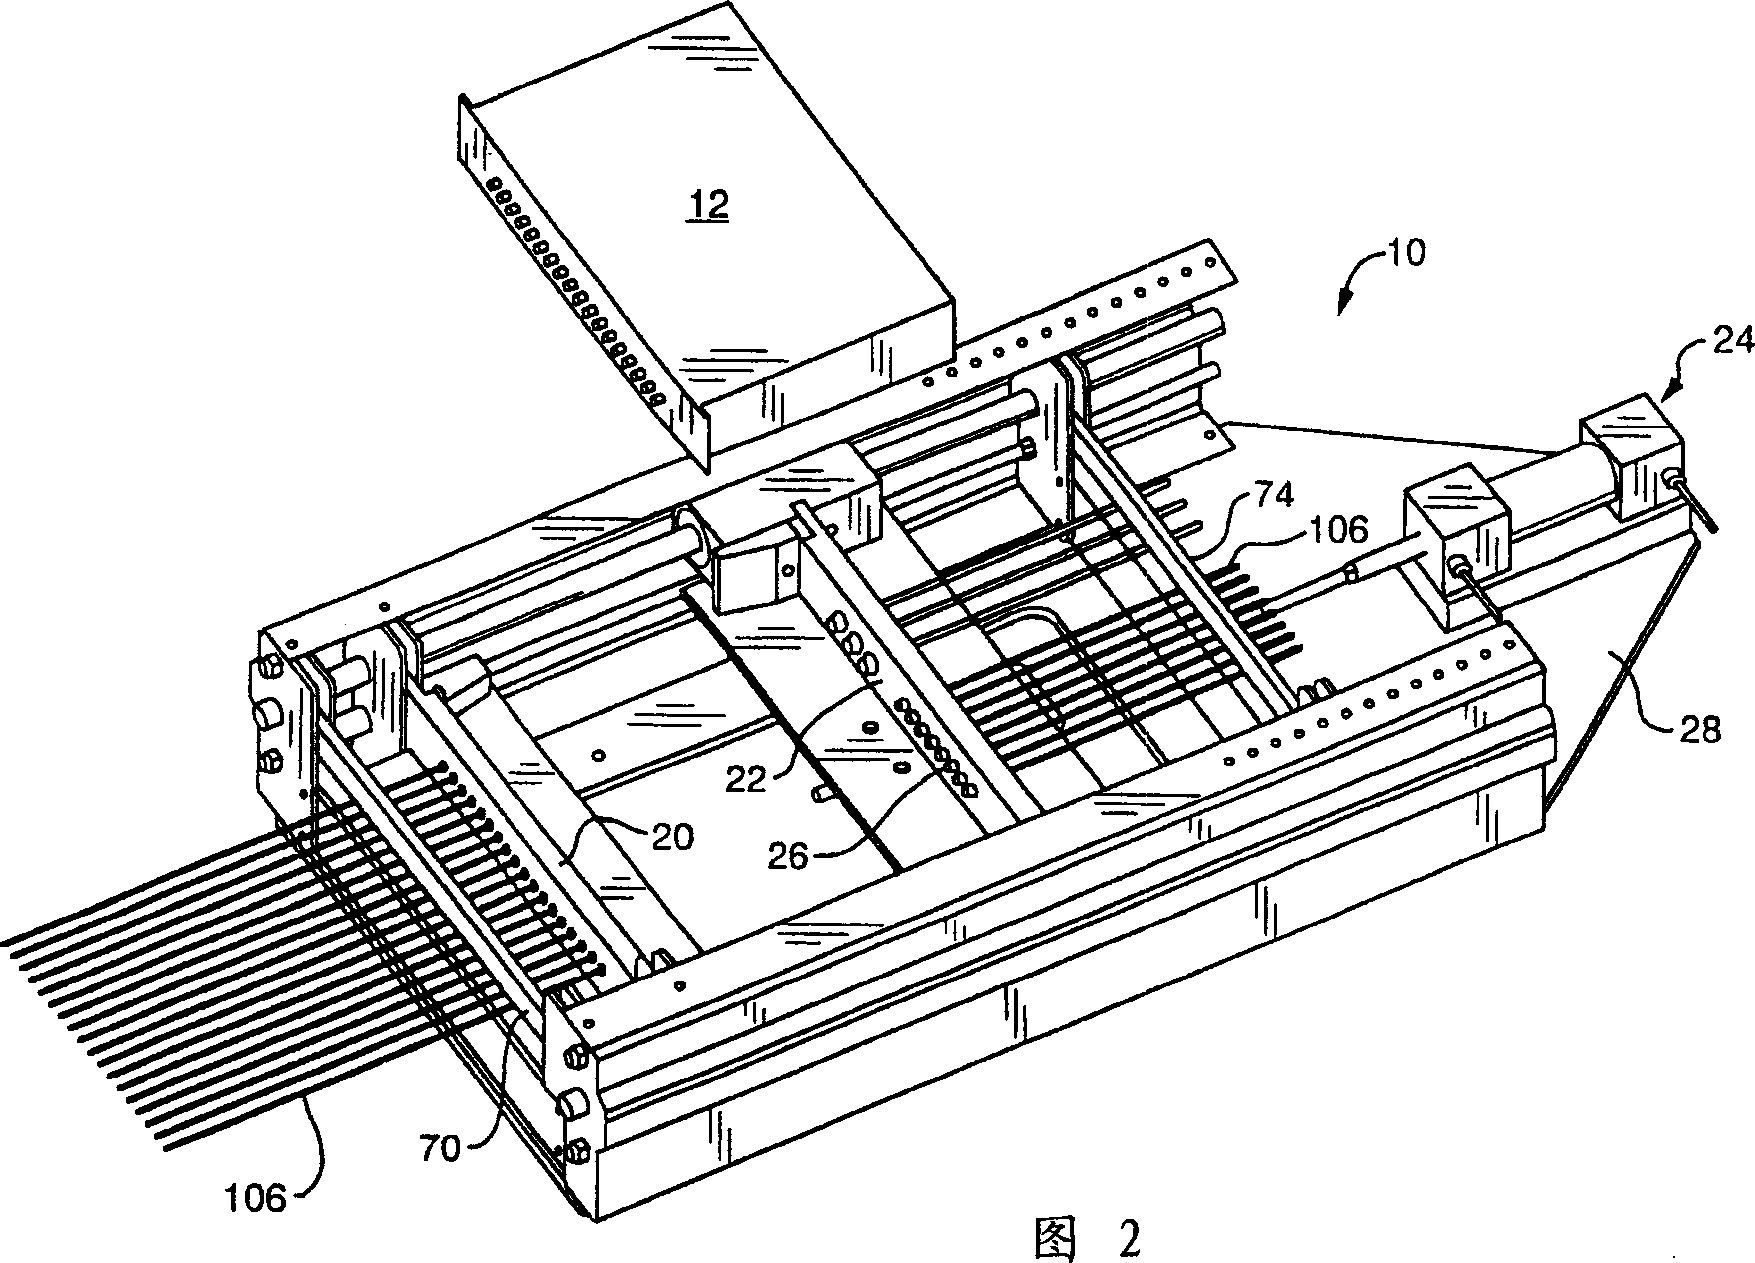 Self-aligning interface apparatus for use in testing electrical devices